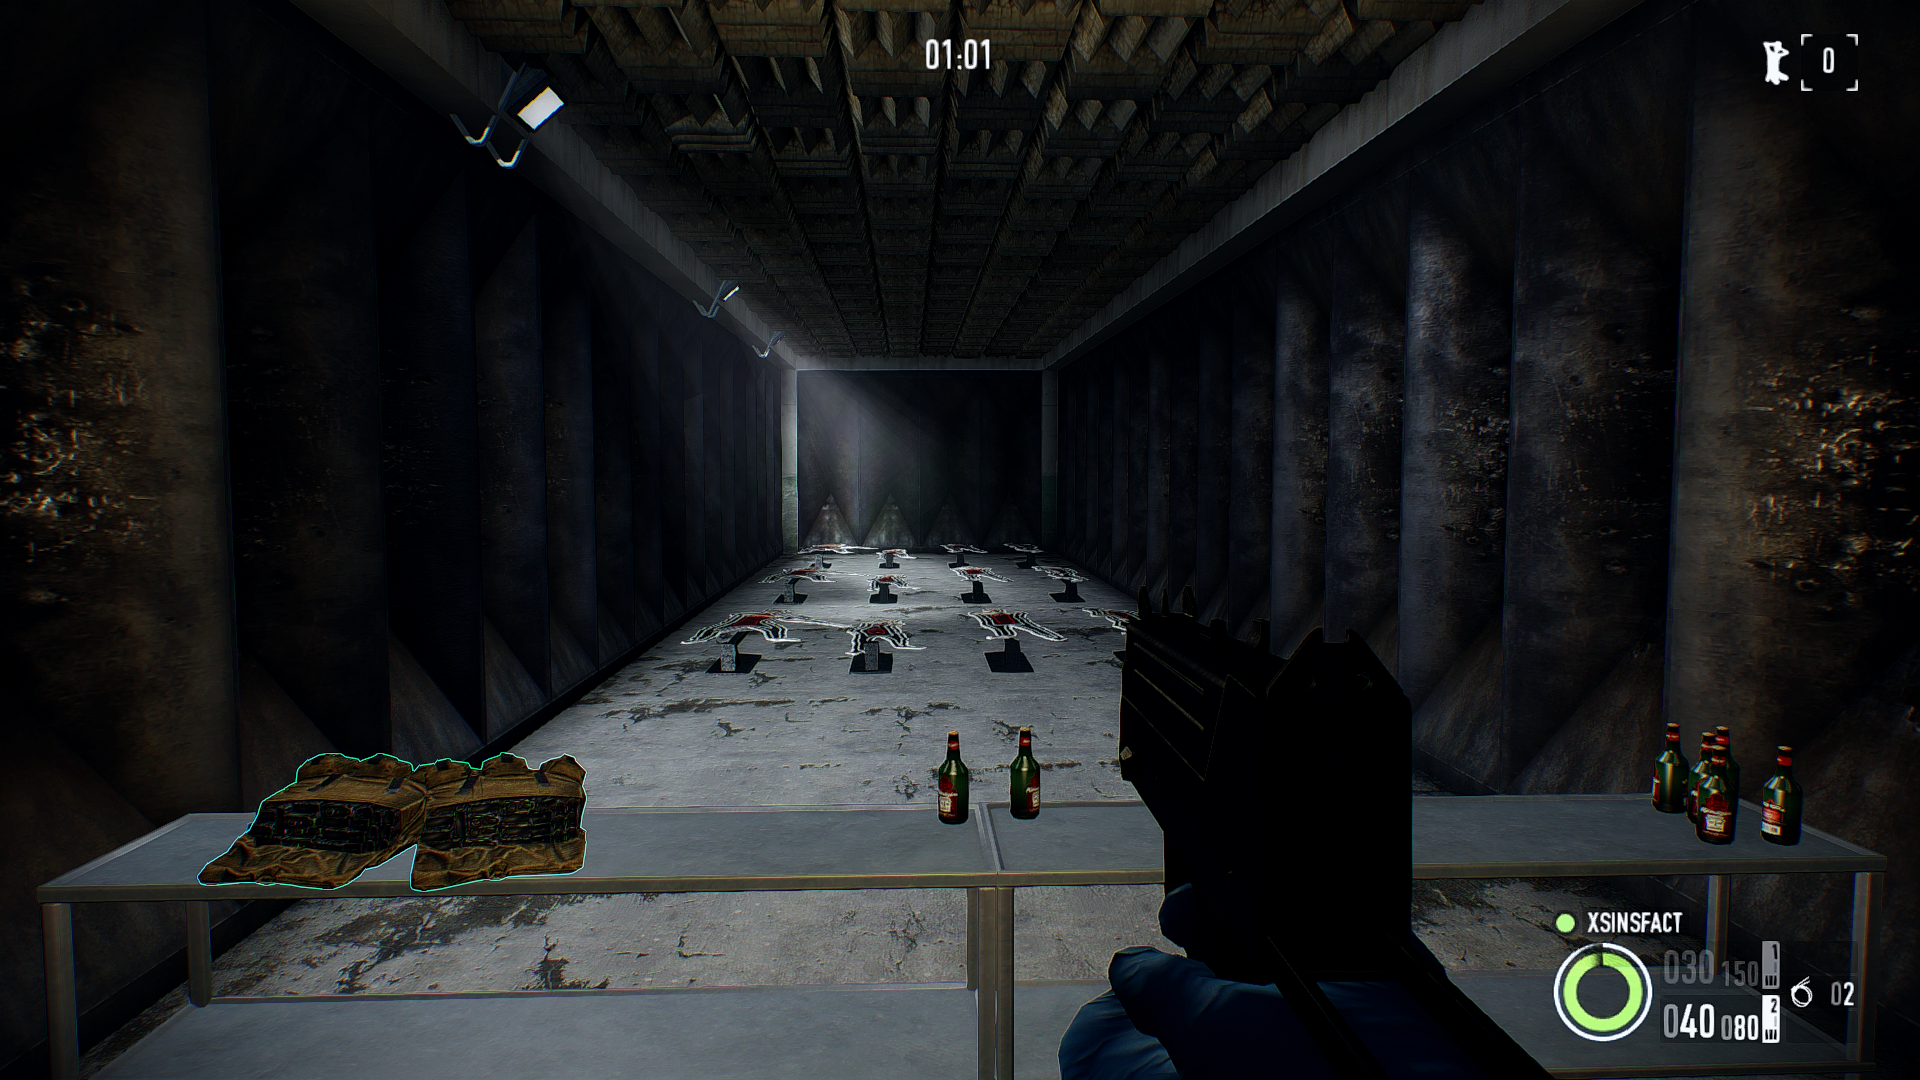 payday 3 unreal engine 5